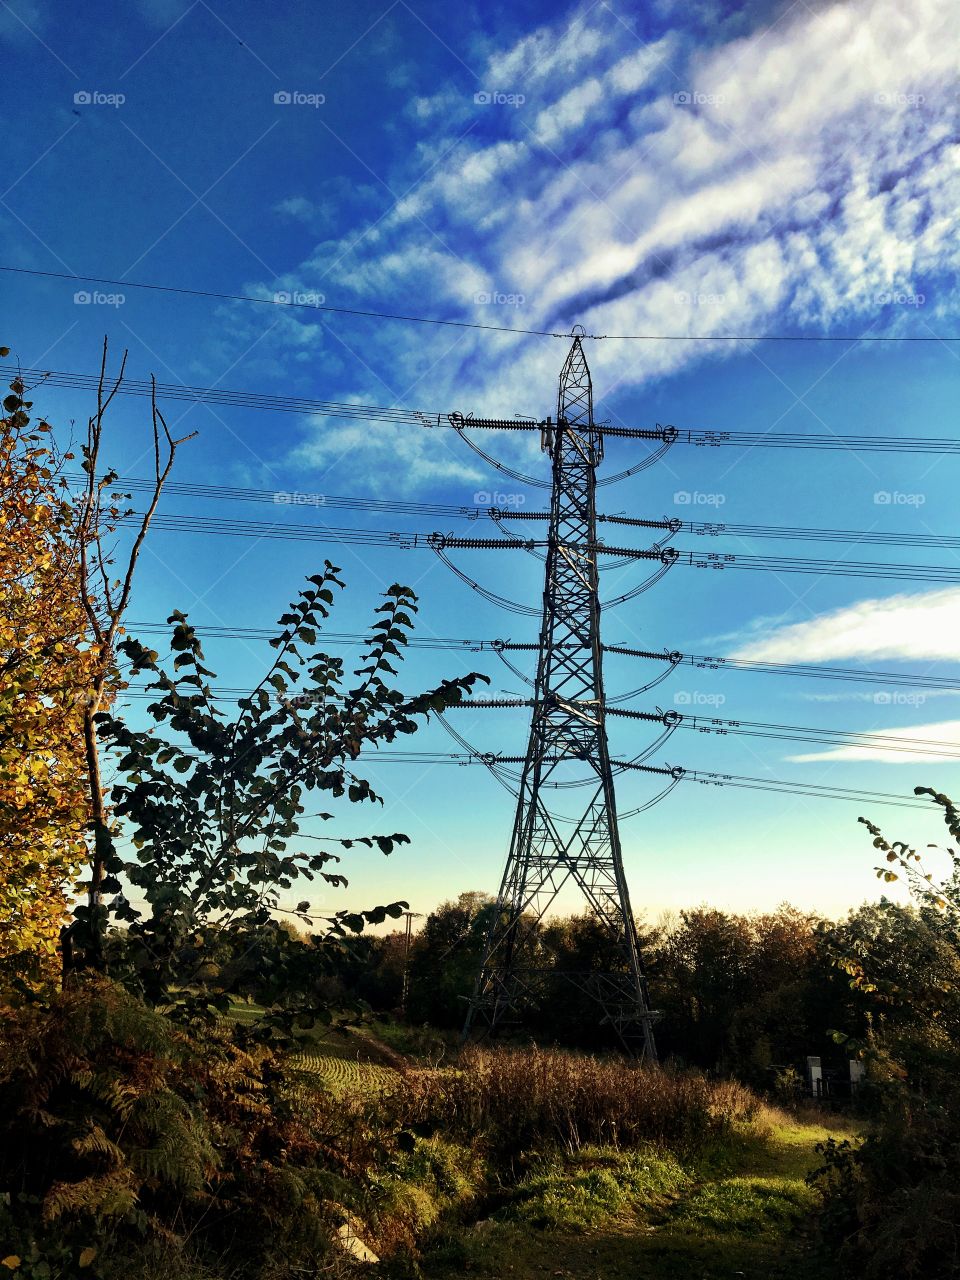 Pylon in the countryside